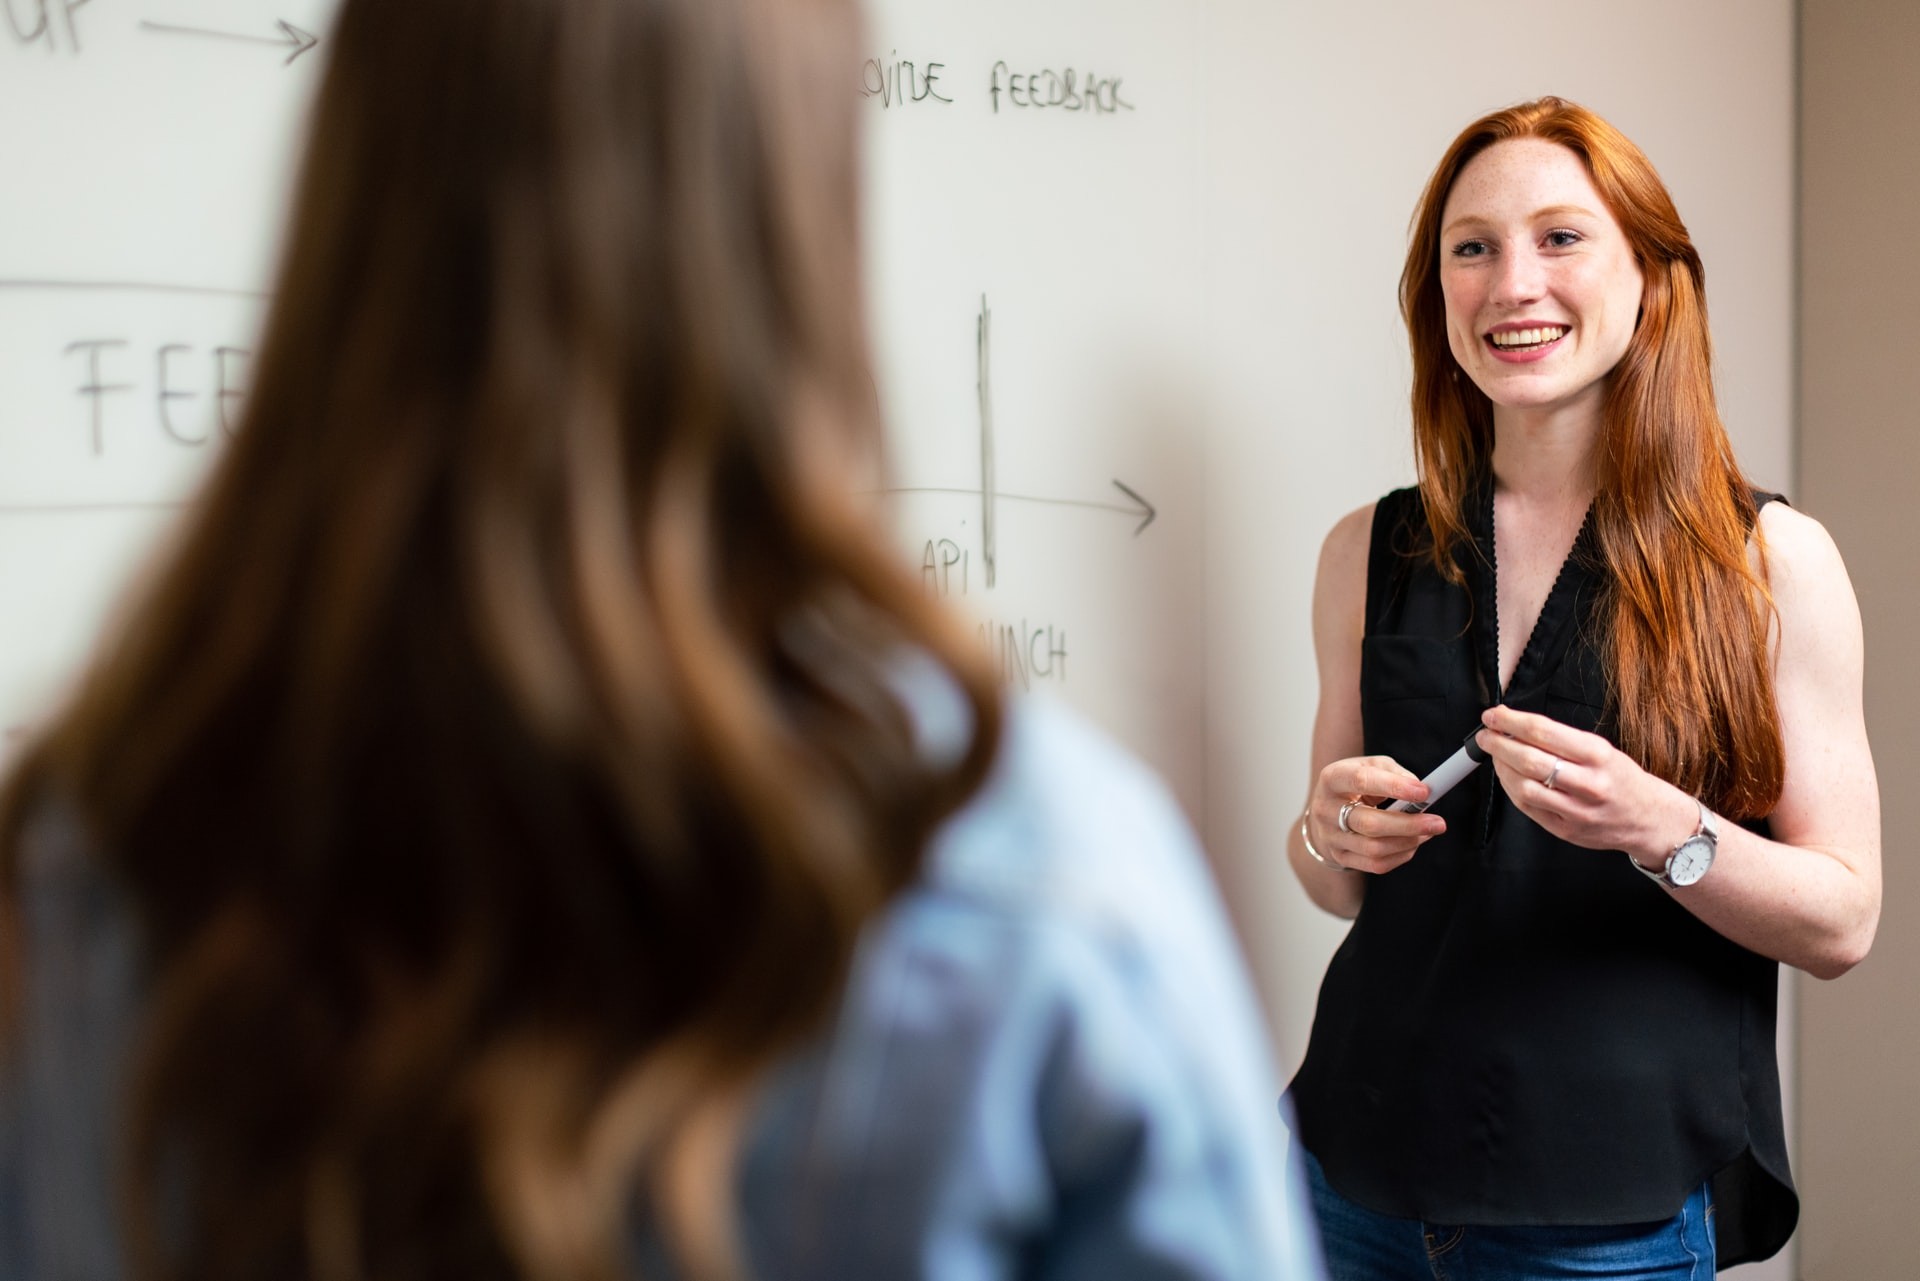 Female teacher with red hair stands in front of a blackboard talking to a student who has their back to the camera.